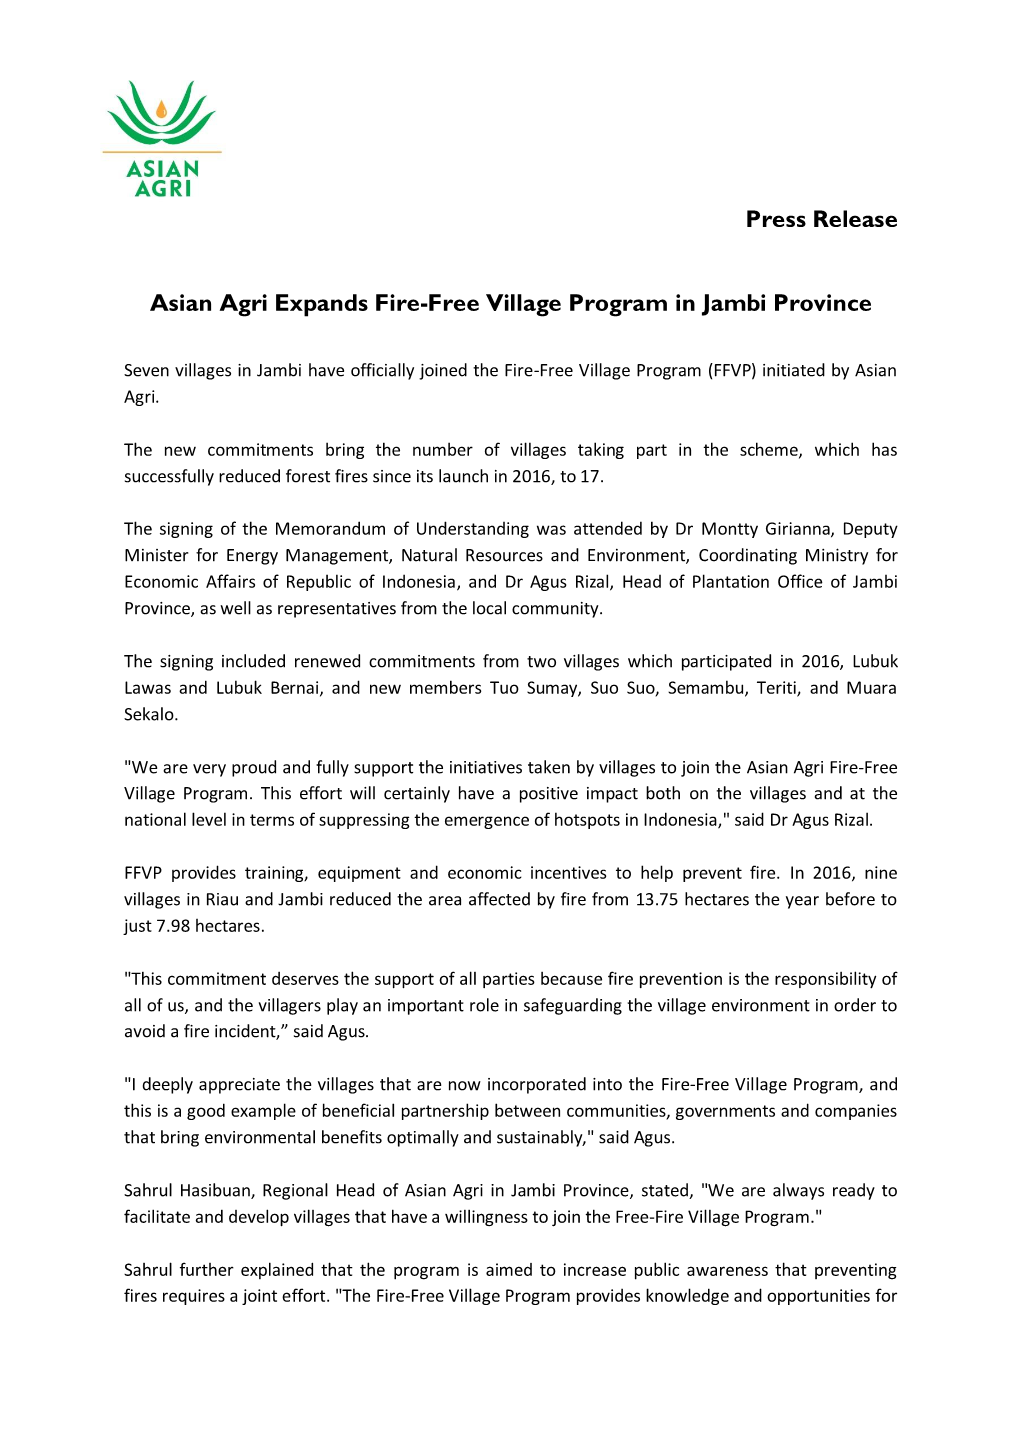 Press Release Asian Agri Expands Fire-Free Village Program in Jambi